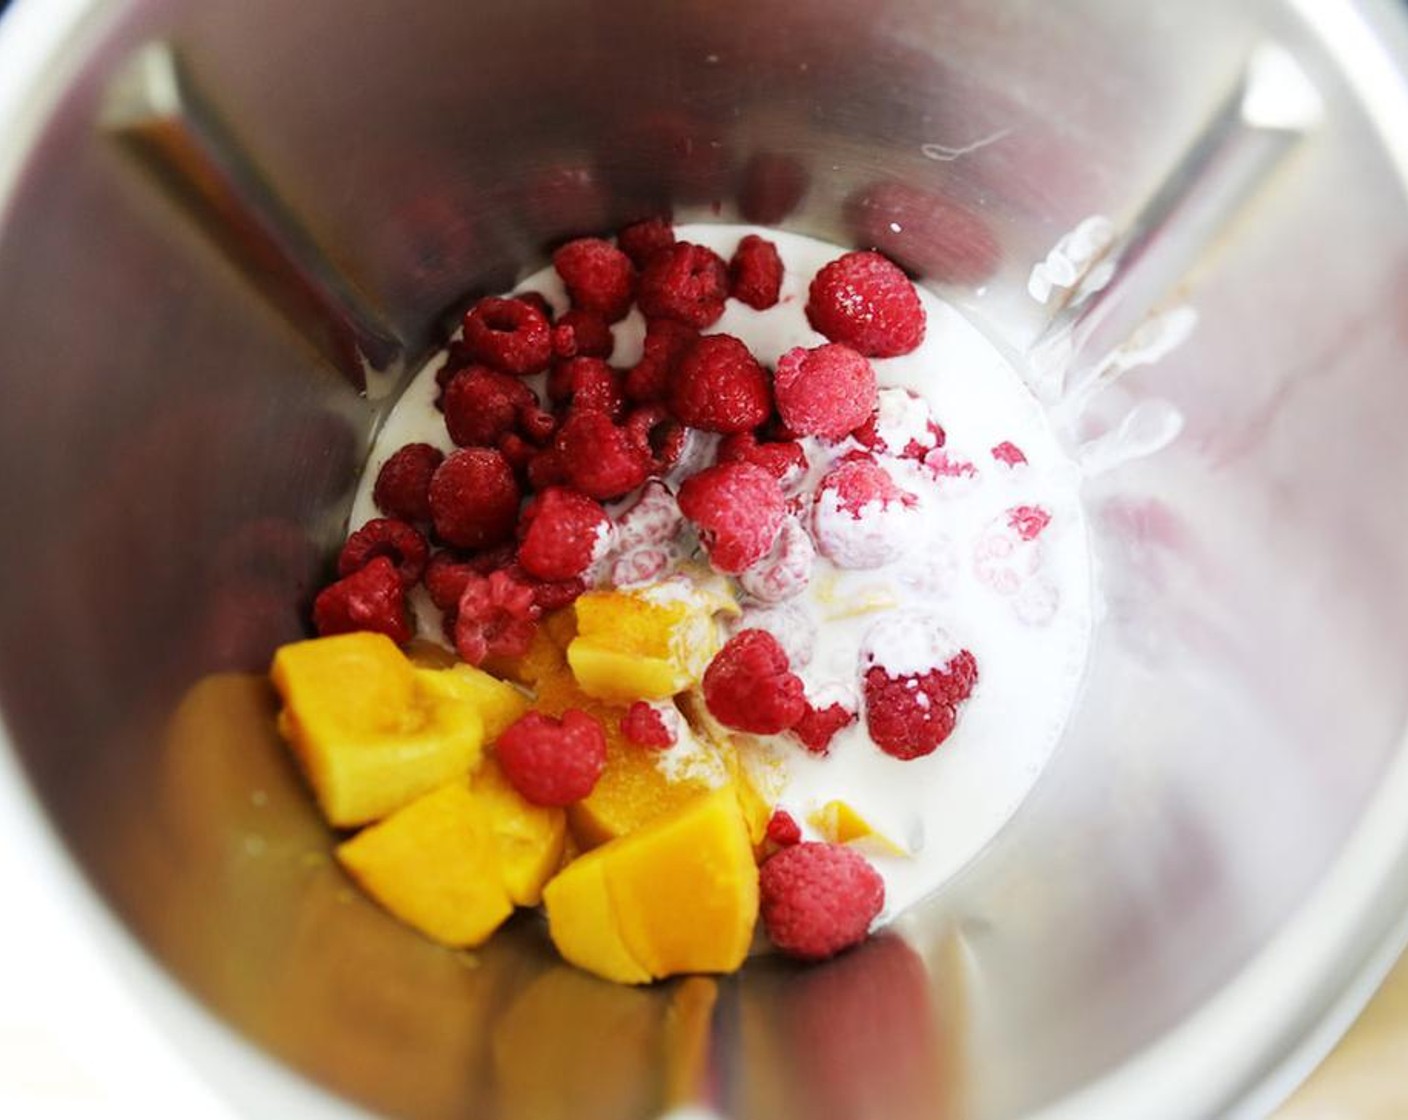 step 2 Blend the Frozen Mangoes (3/4 cup), Frozen Raspberries (1/2 cup) and Coconut Milk (8 oz) on speed 5 for 2 minutes until smooth.